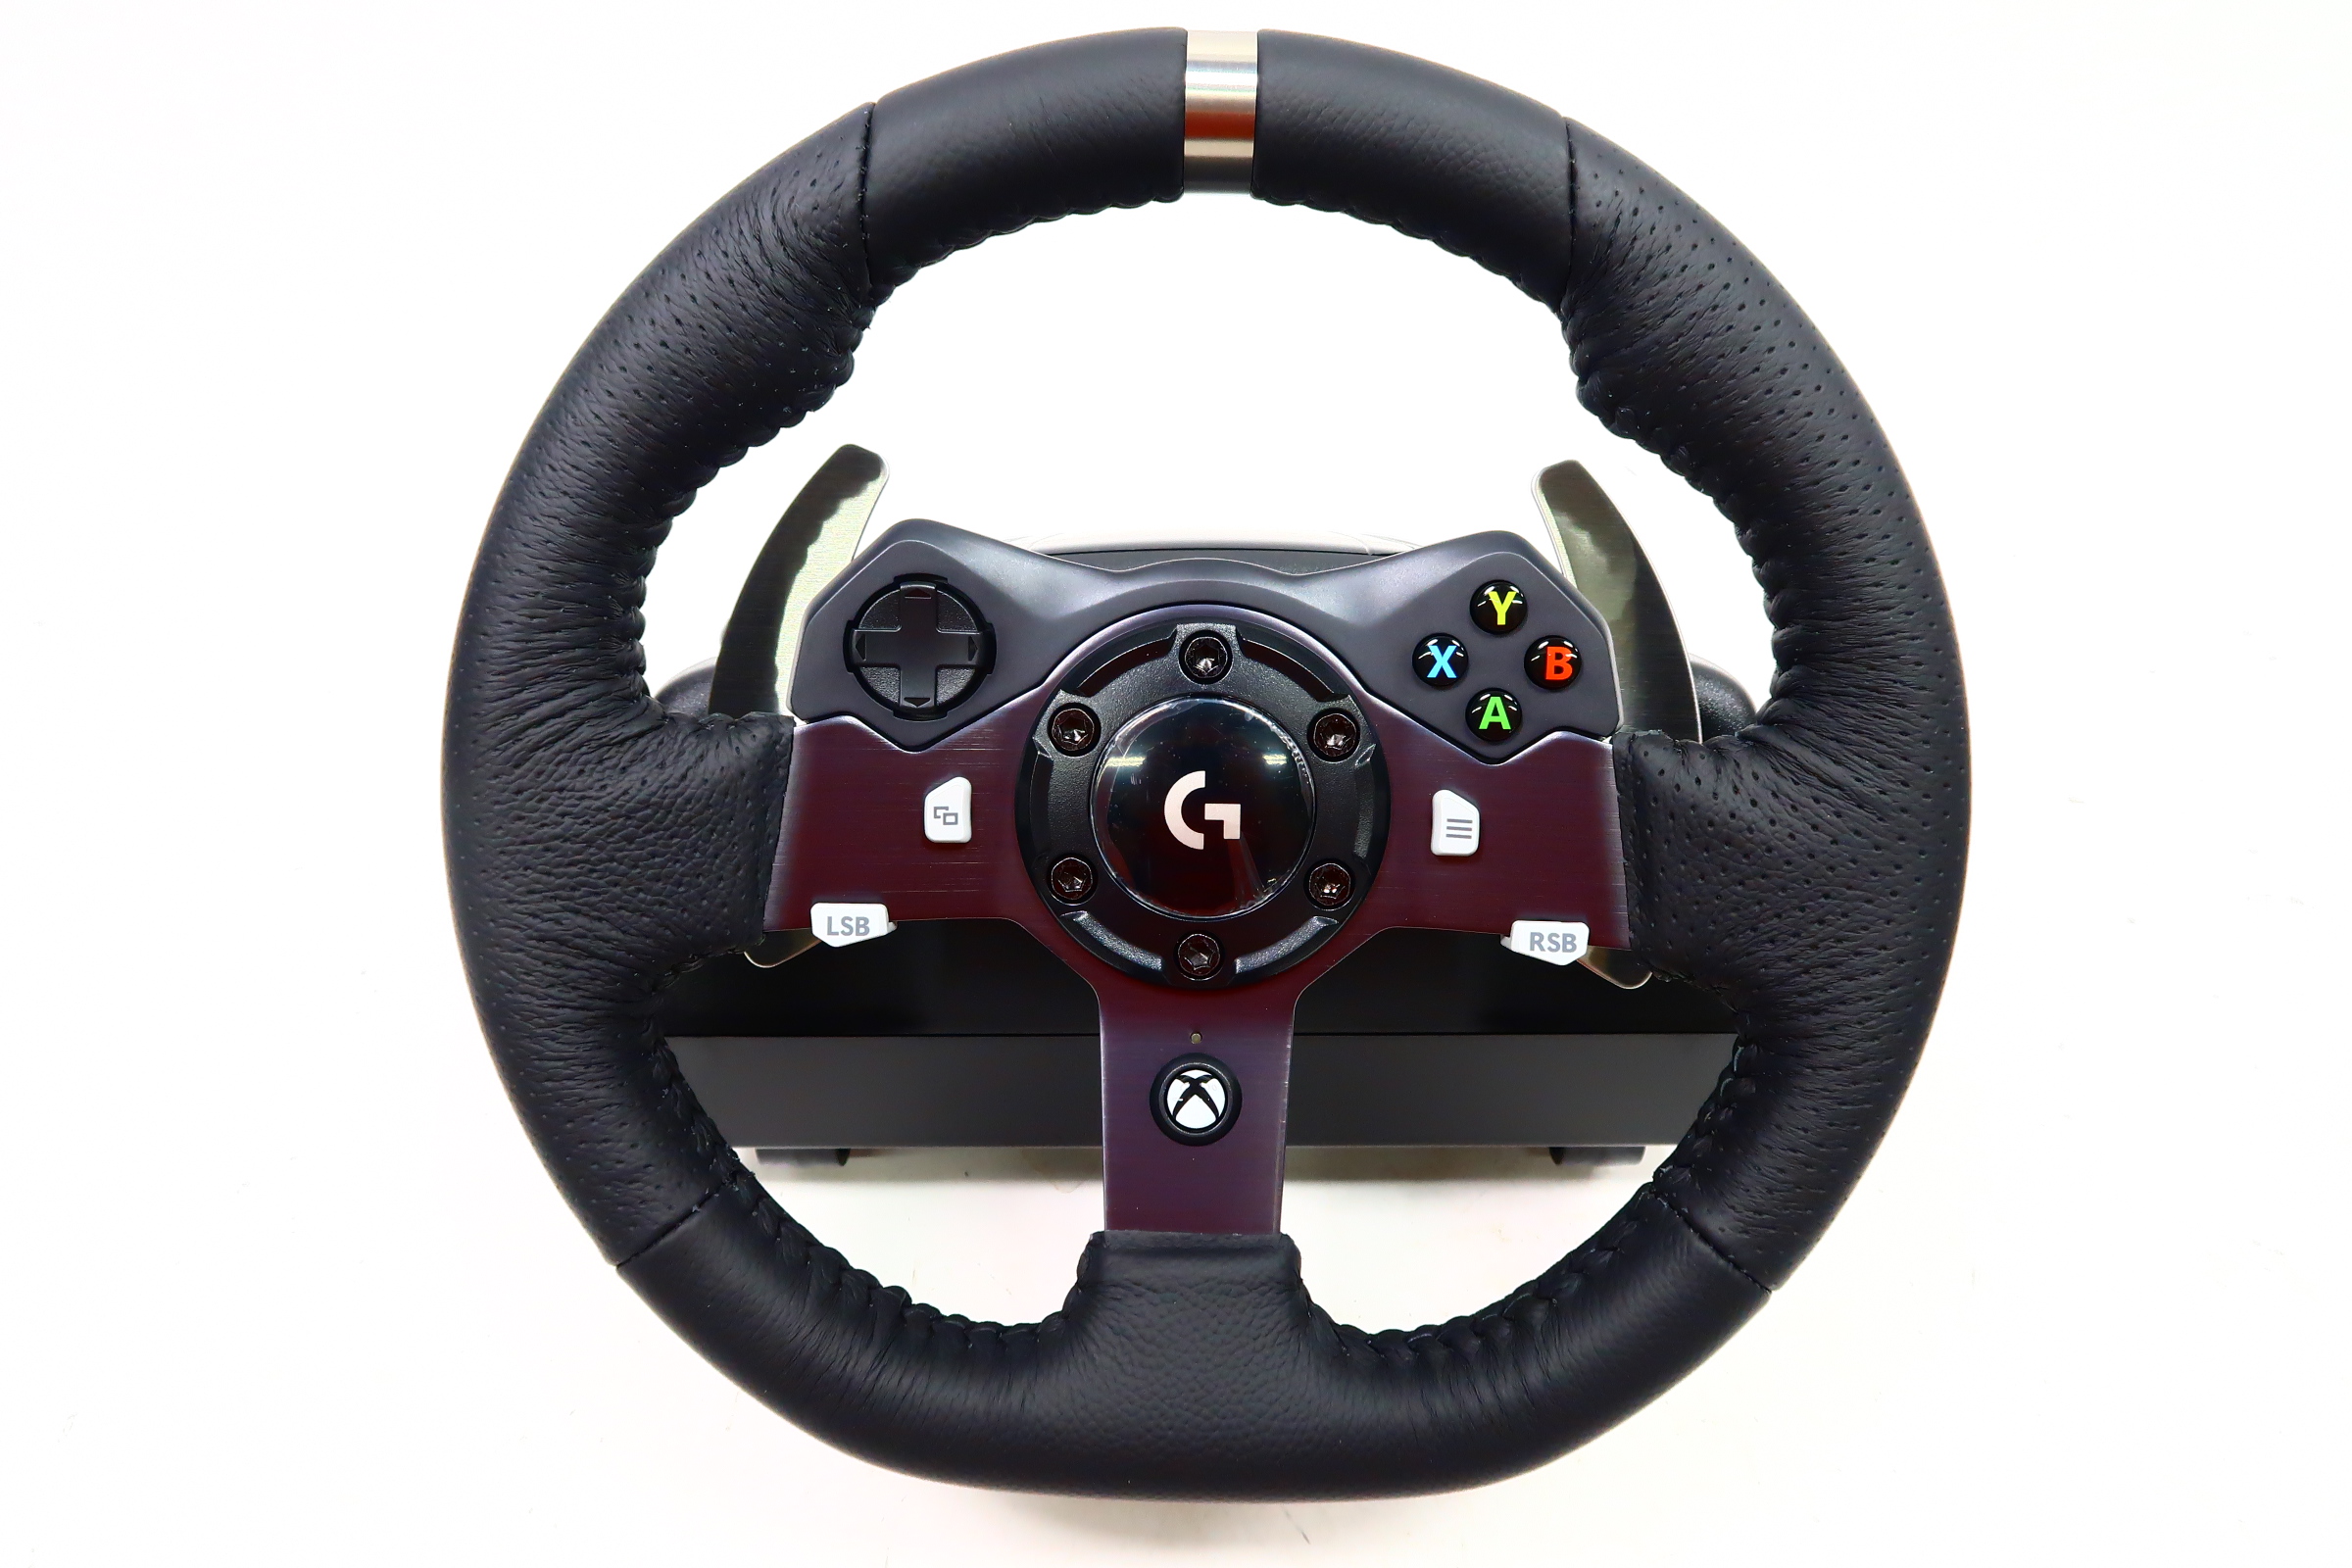 Logitech G920 Driving Force Racing Wheel for Xbox One, PC, PS3, PS4 on Vimeo